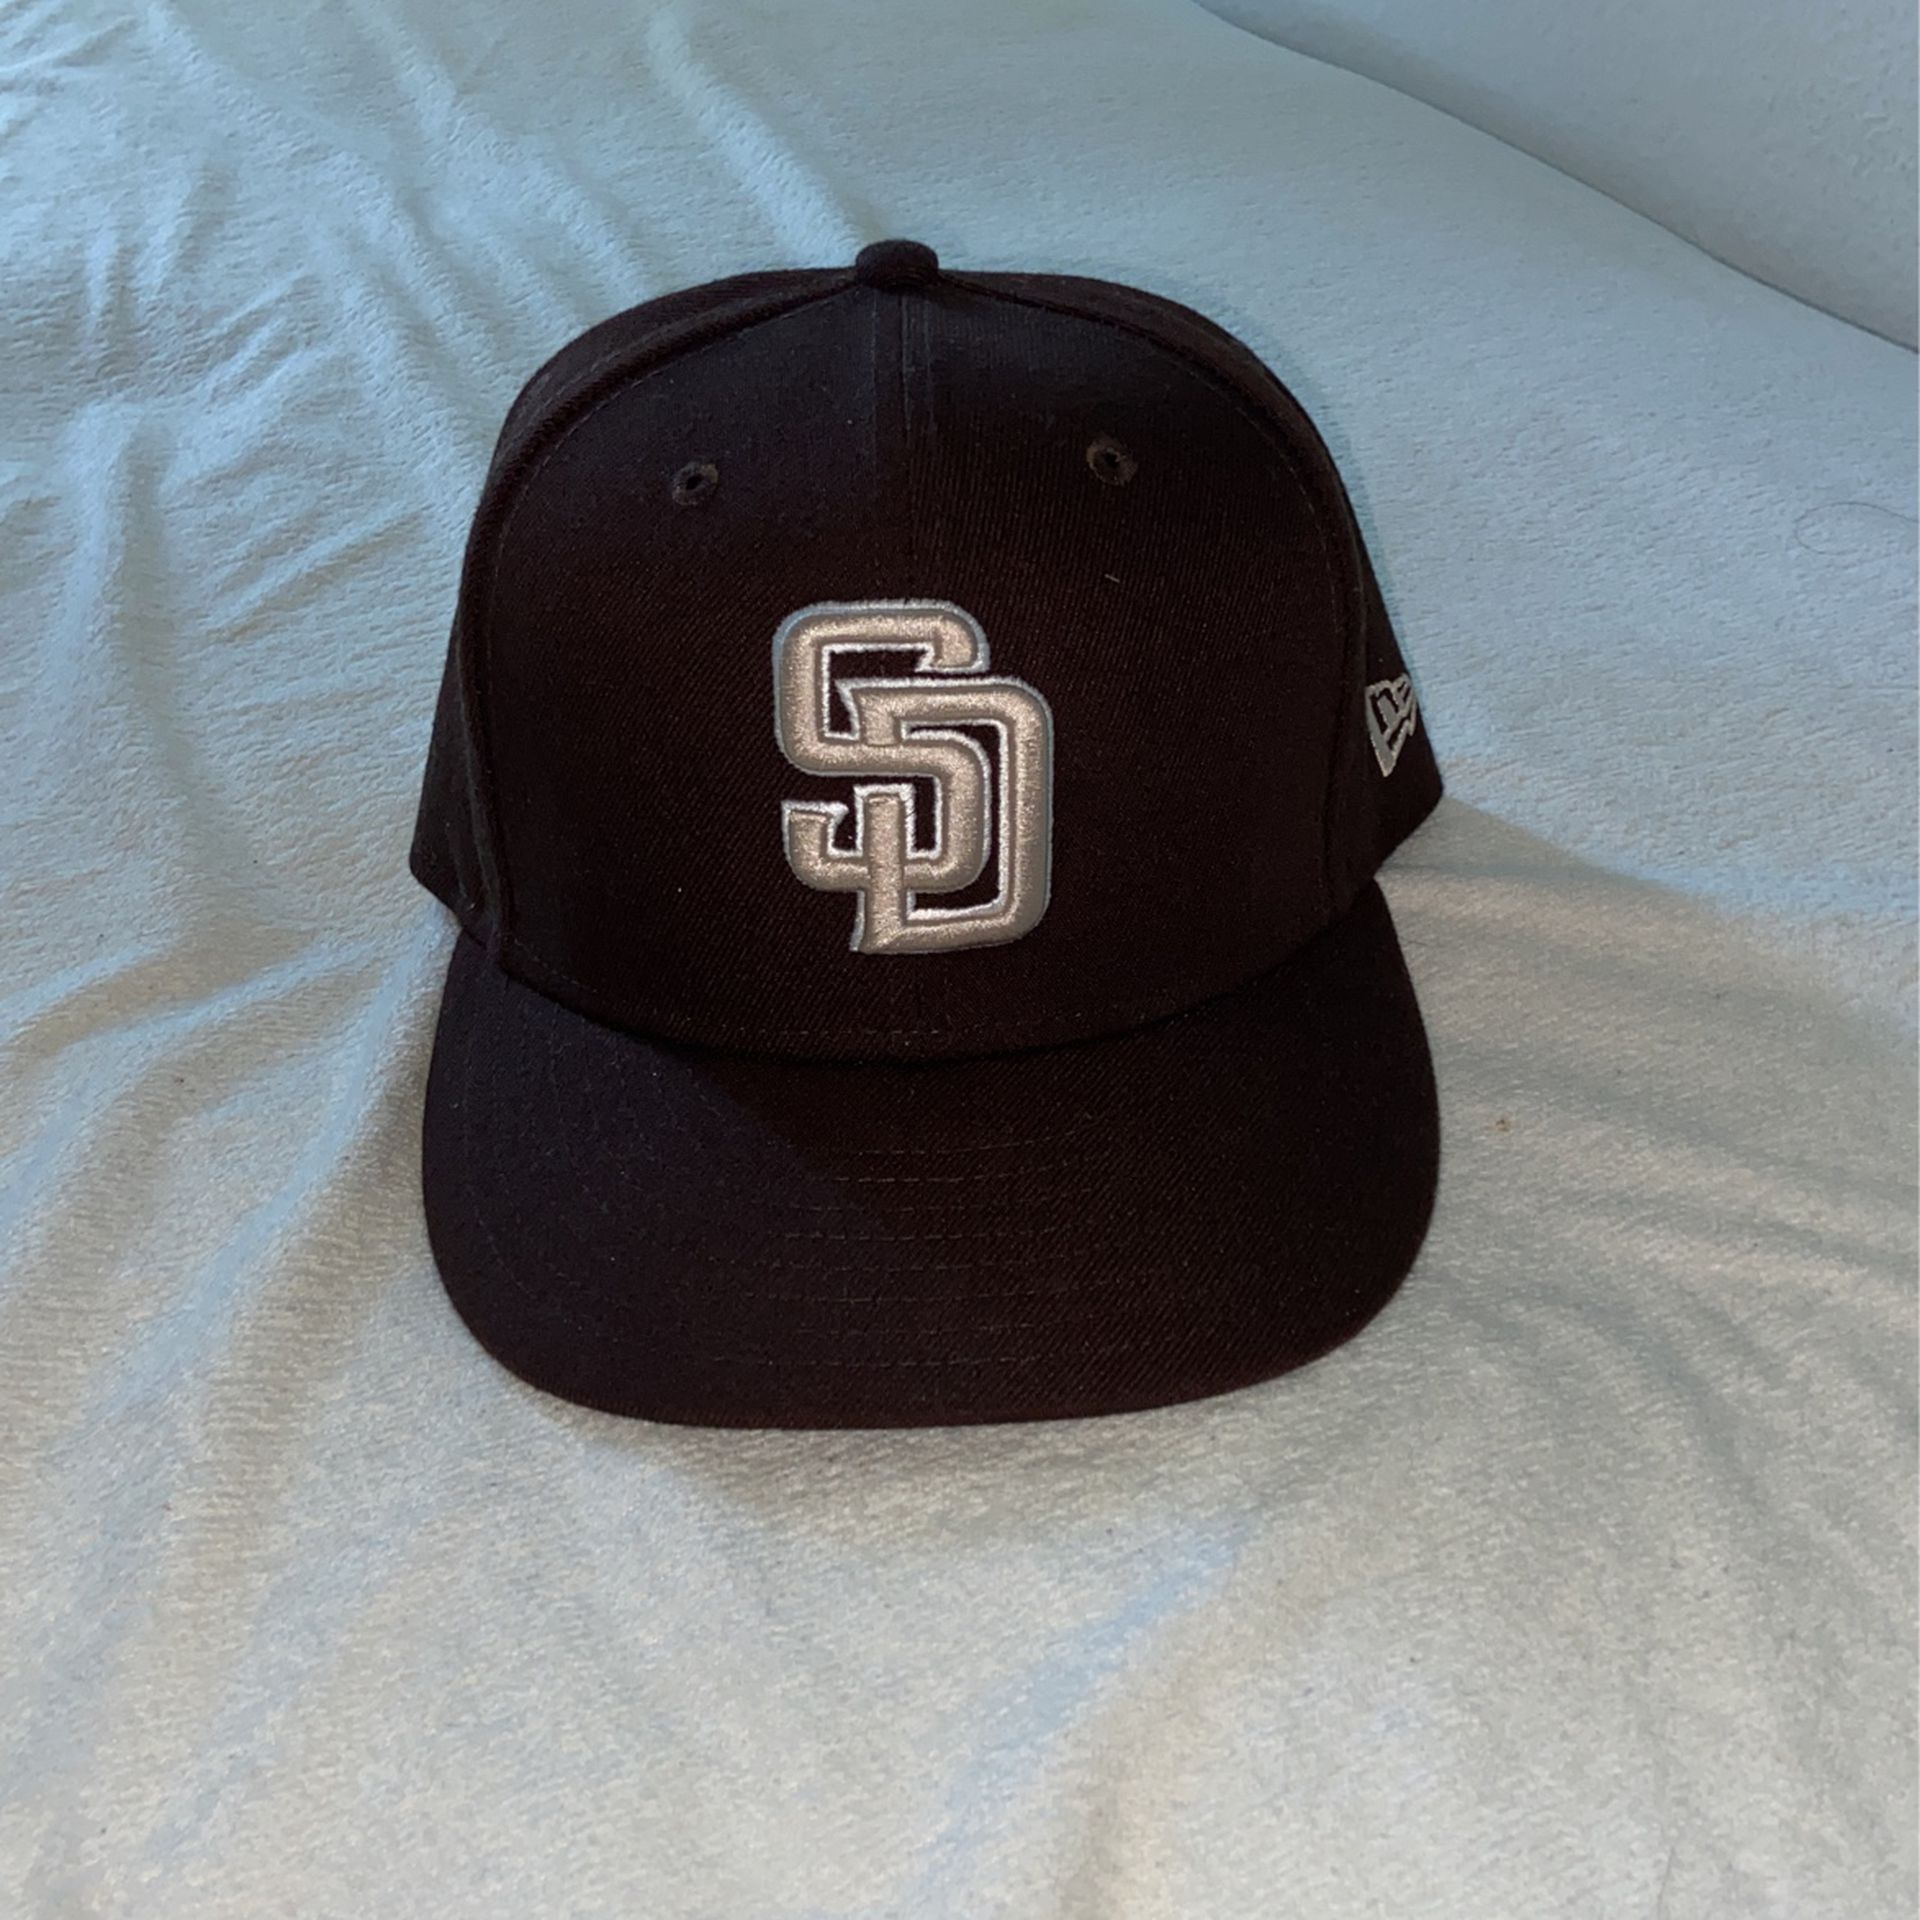 San Diego Padres Hat, New era Size 7 3/8 for Sale in San Diego, CA - OfferUp